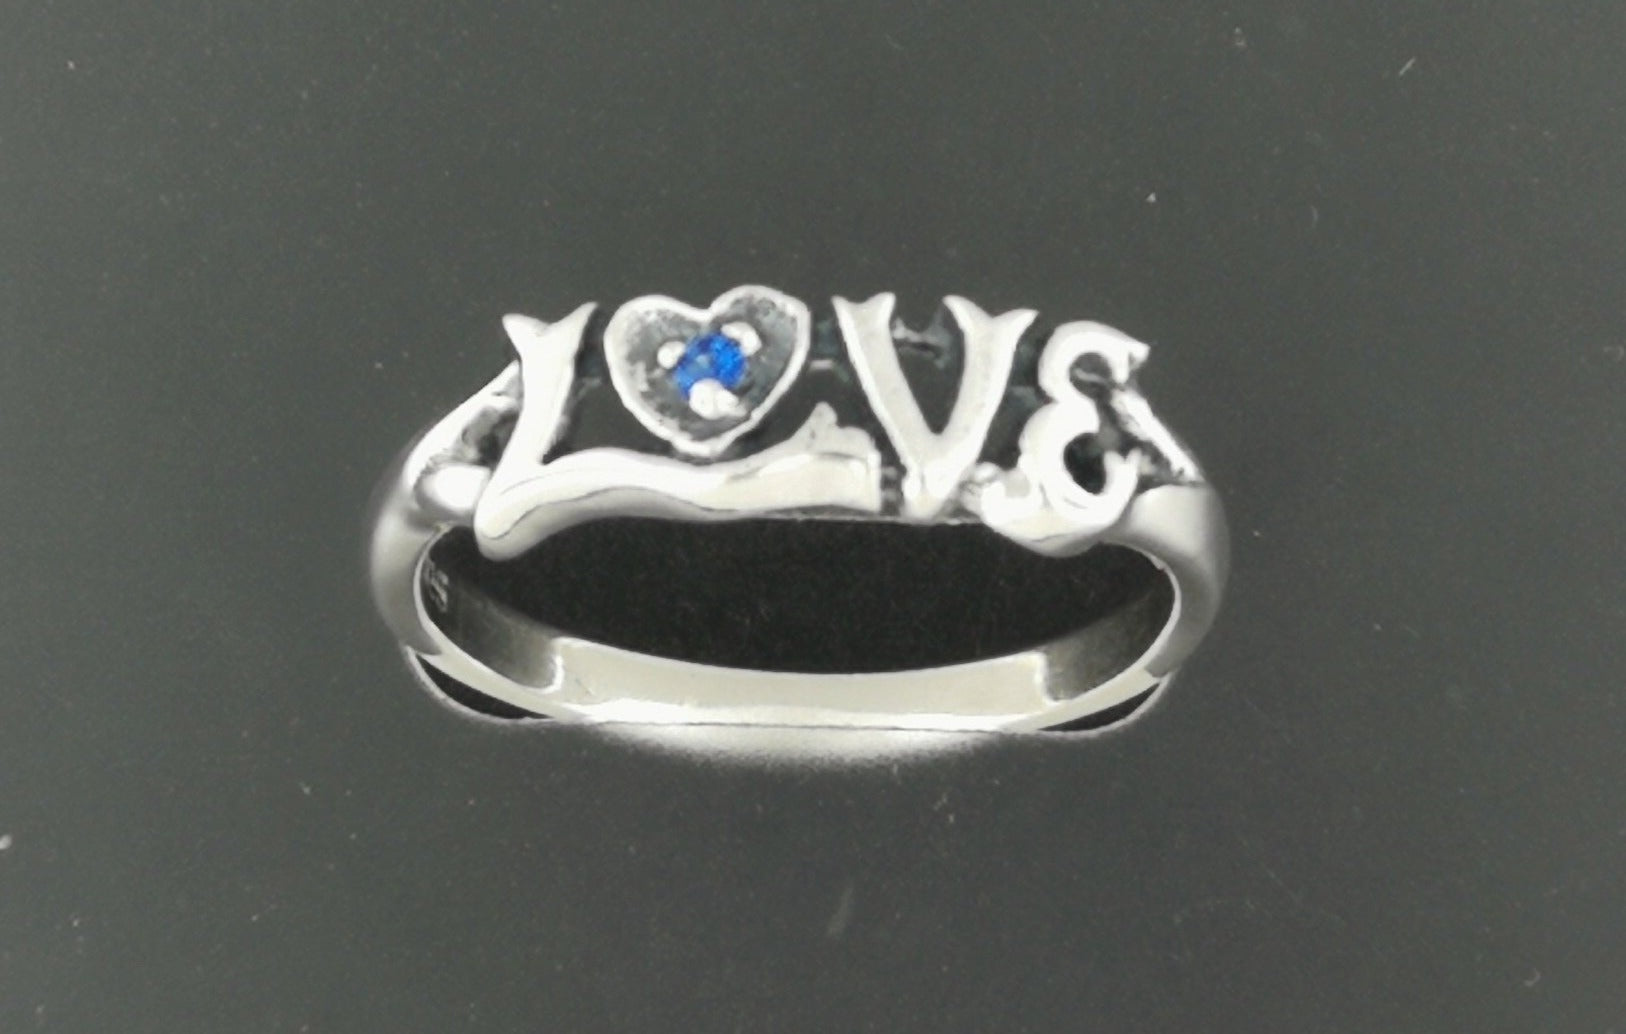 Love Ring in Sterling Silver with Gemstone Heart, Birthstone Love Ring, Silver Love Ring, Sweetheart Ring, Birthstone Heart Ring, Silver Love Band, Birthstone Love Ring, 925 Silver Ring, Silver Love Ring, Gemstone Love Ring, Love Ring With Gemstone